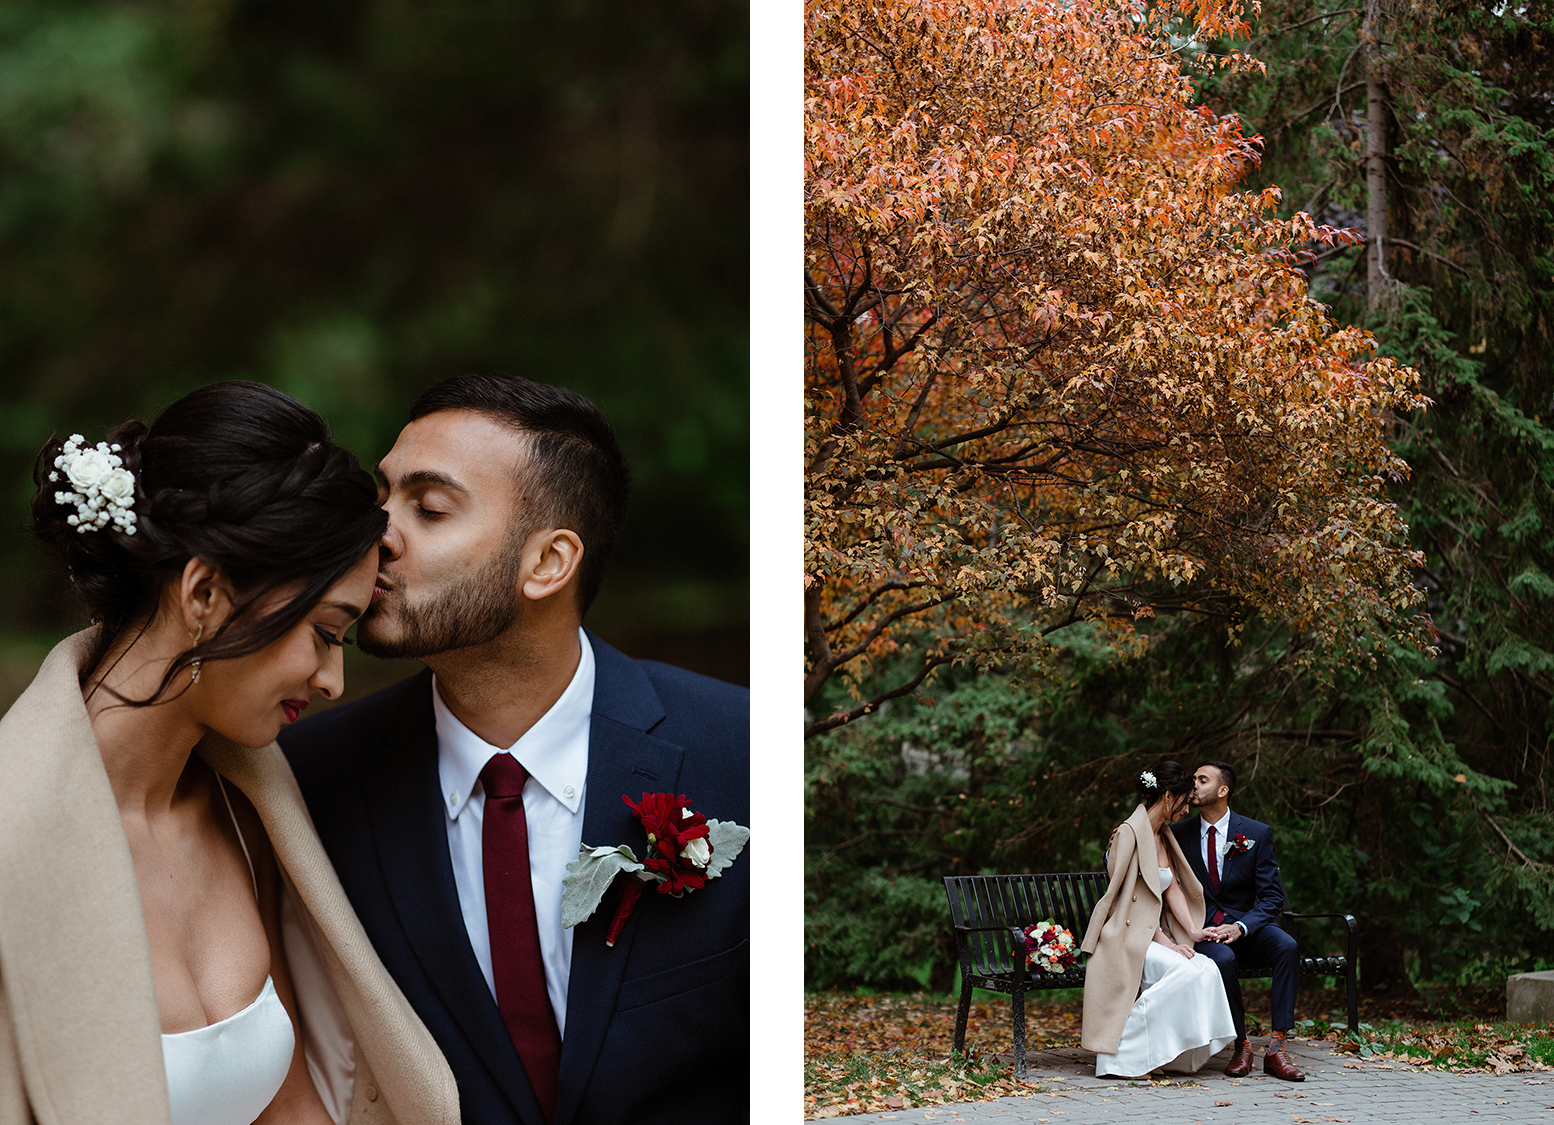 Small-Intimate-Elopement-Downtown-Toronto-U-of-T-Vows-where-to-elope-in-toronto-21.PNG